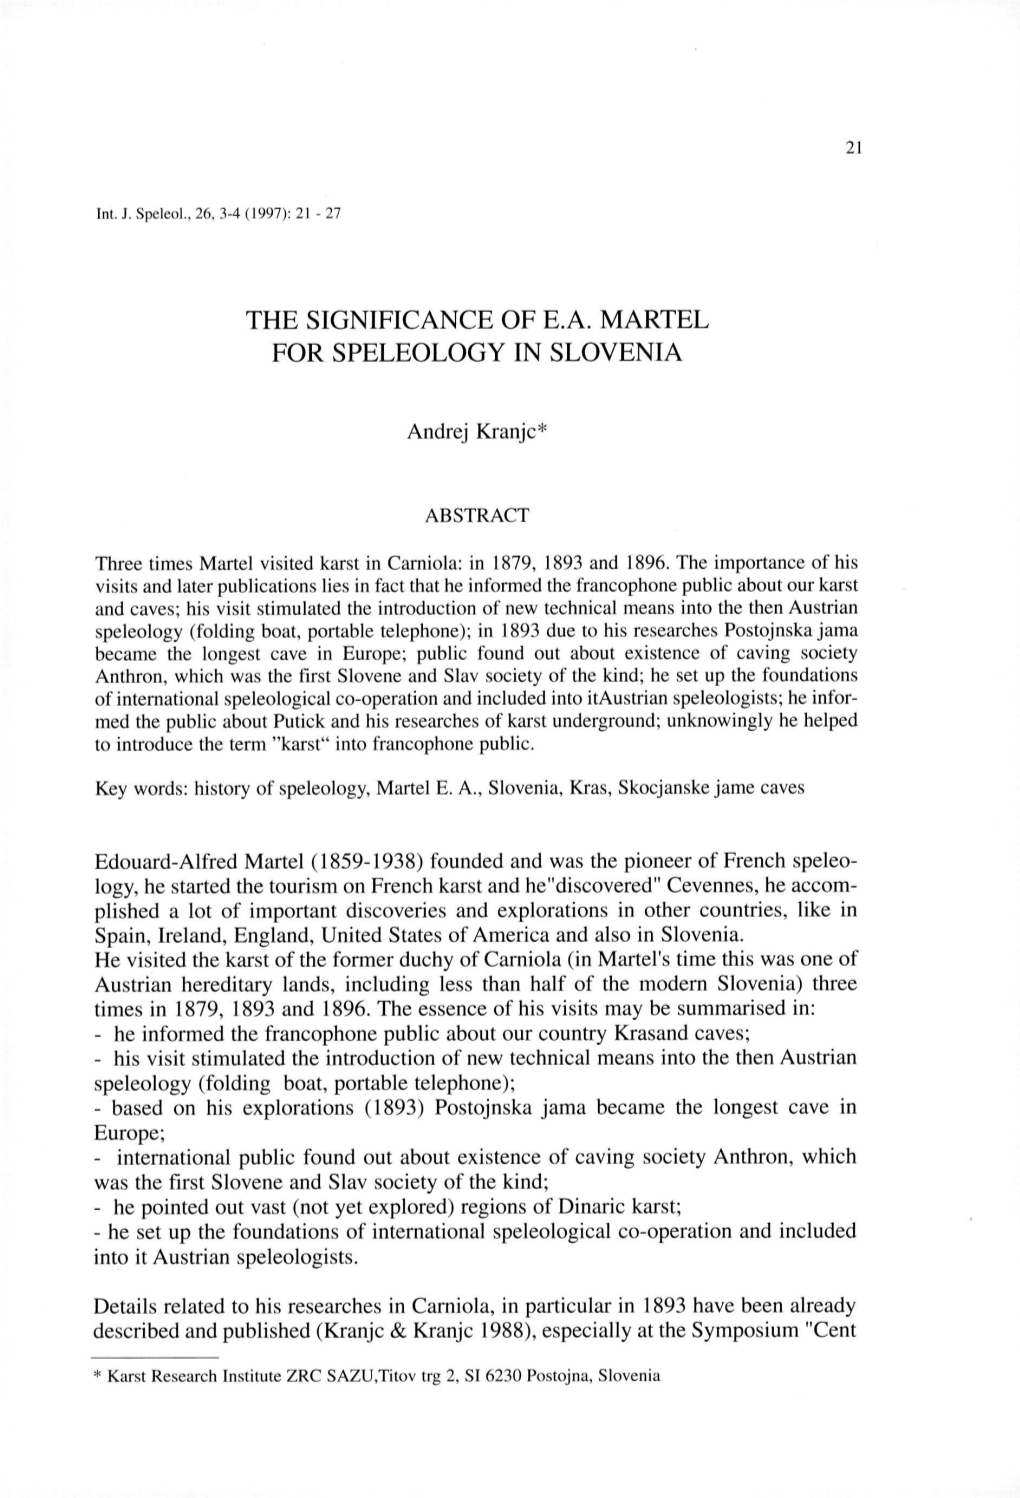 The Significance of E. A. Martel for Speleology in Slovenia